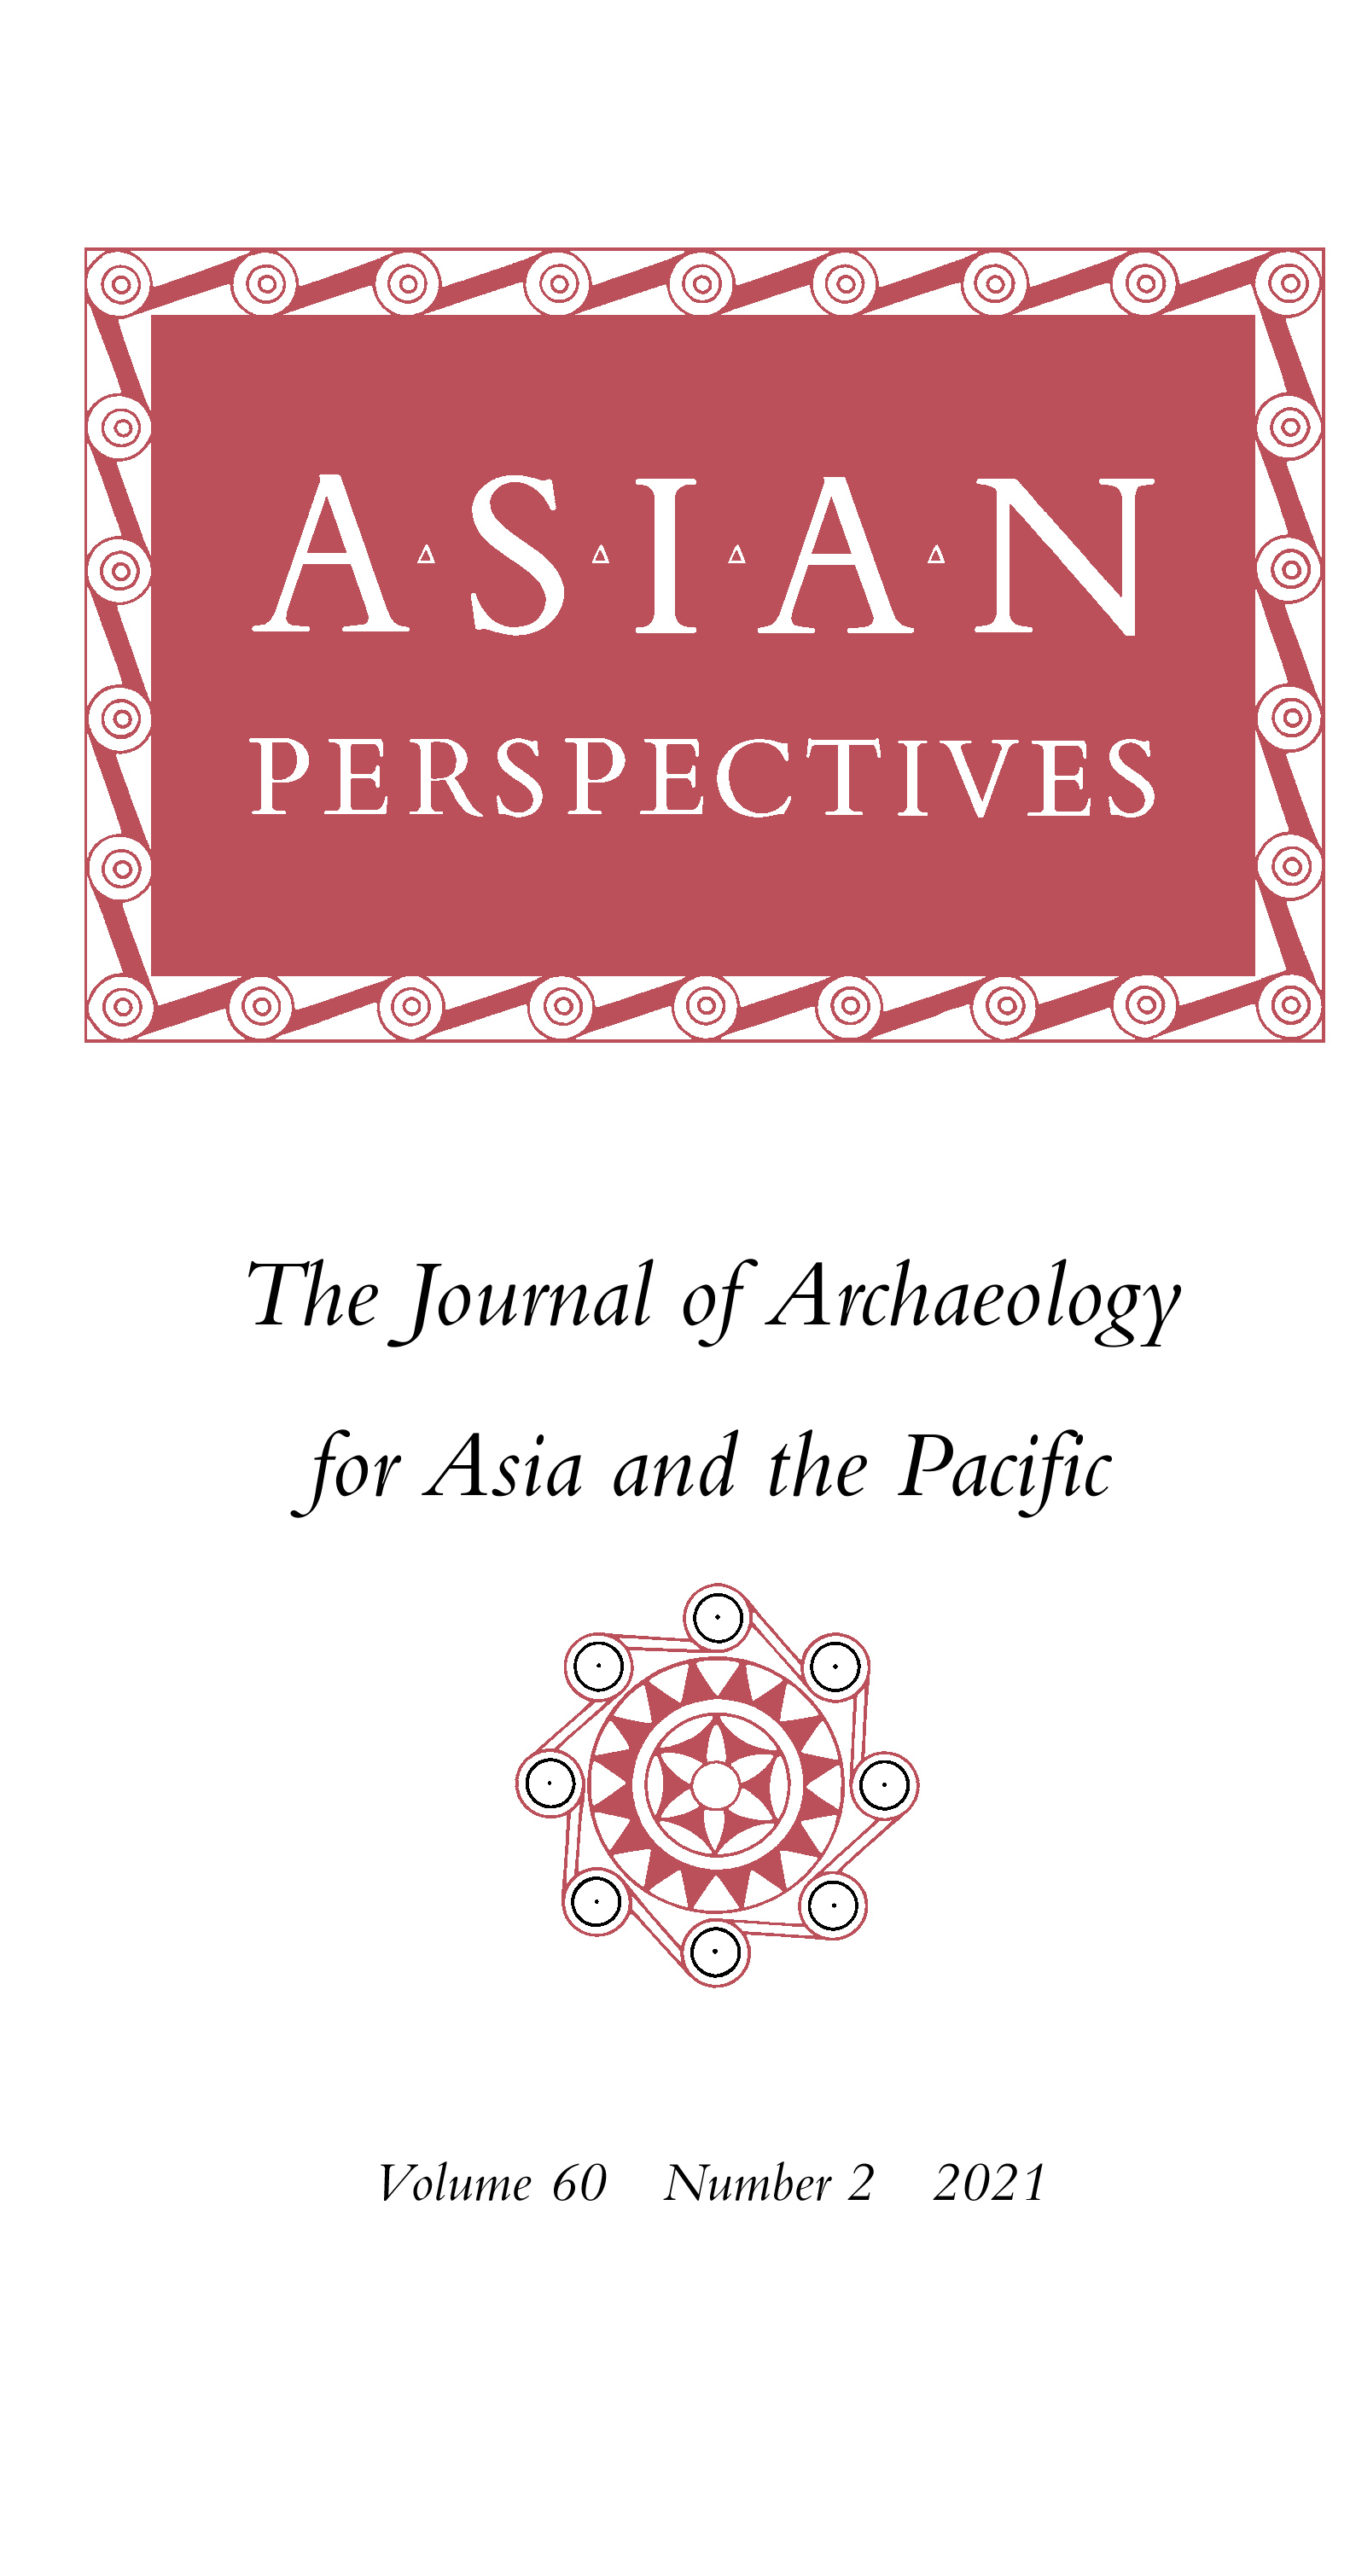 Asian Perspectives: The Journal of Archaeology for Asia and the Pacific